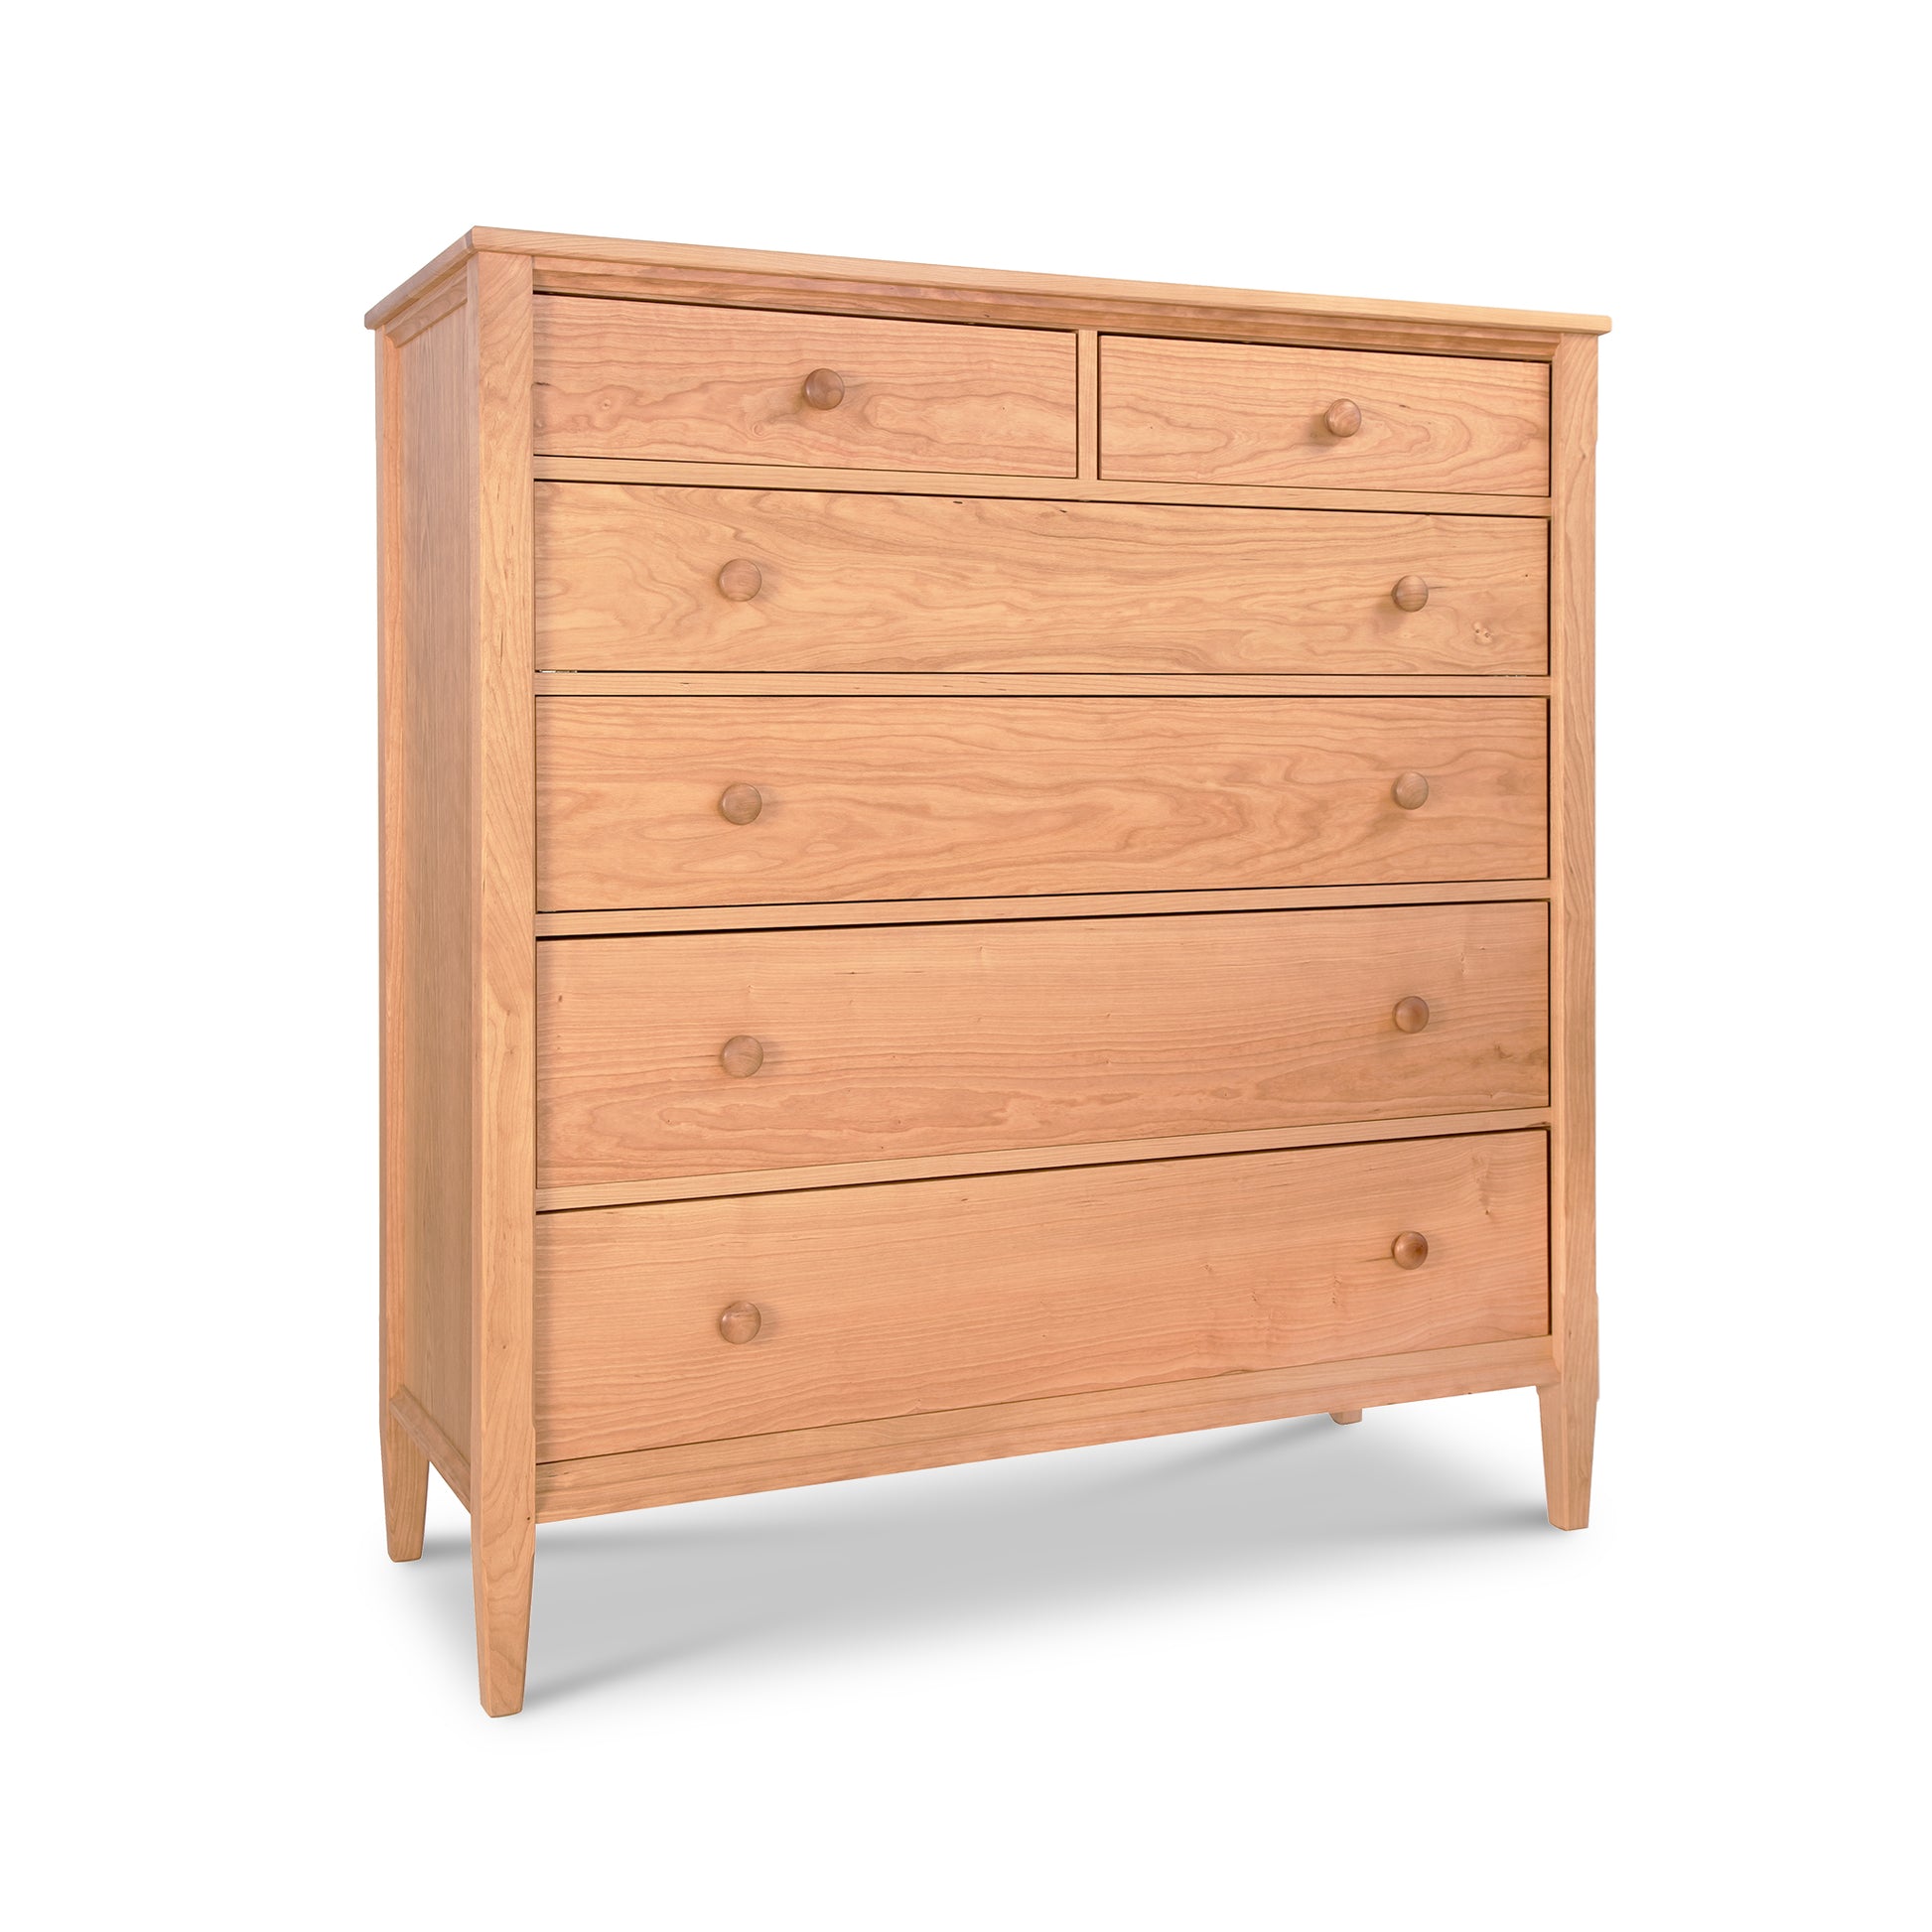 An extra wide Maple Corner Woodworks Vermont Shaker Chest of drawers made from natural hardwood furniture, placed on a white background.